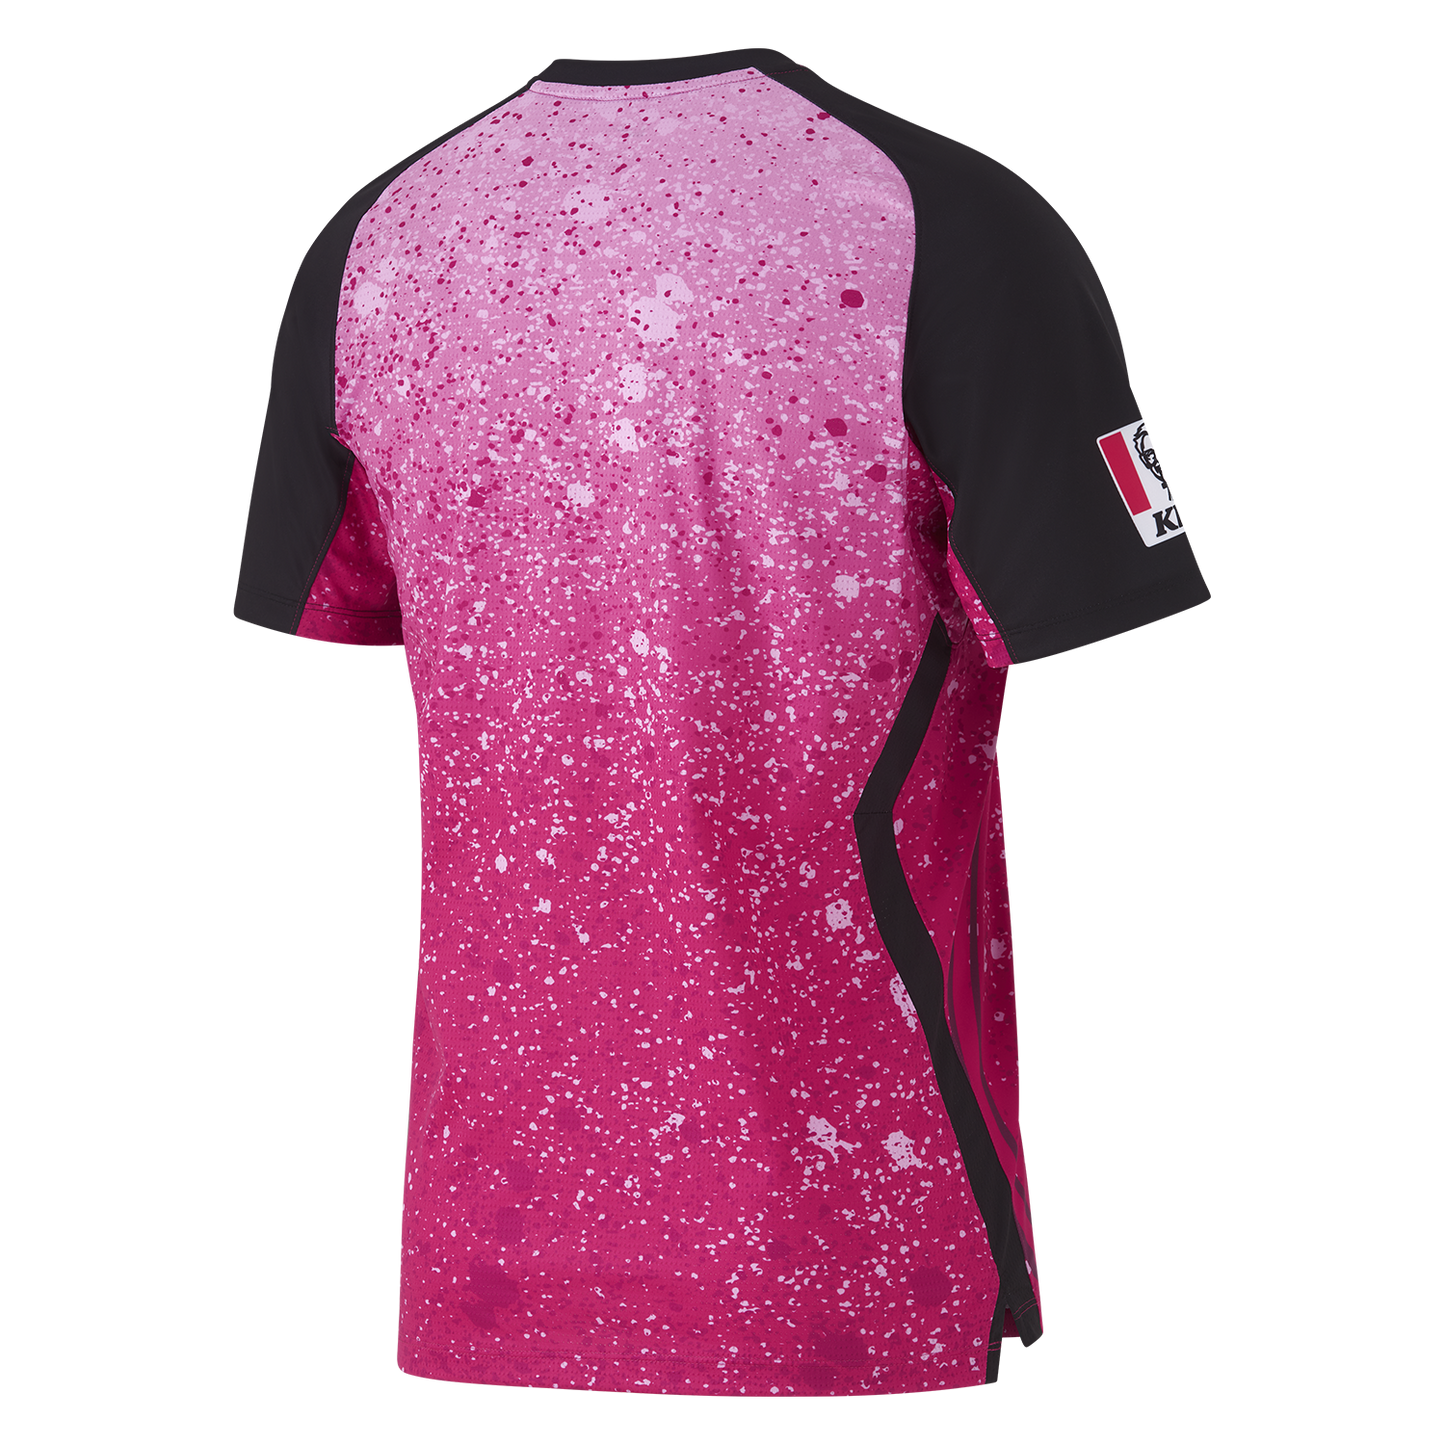 Official Sydney Sixers BBL Merchandise The Official Cricket Shop